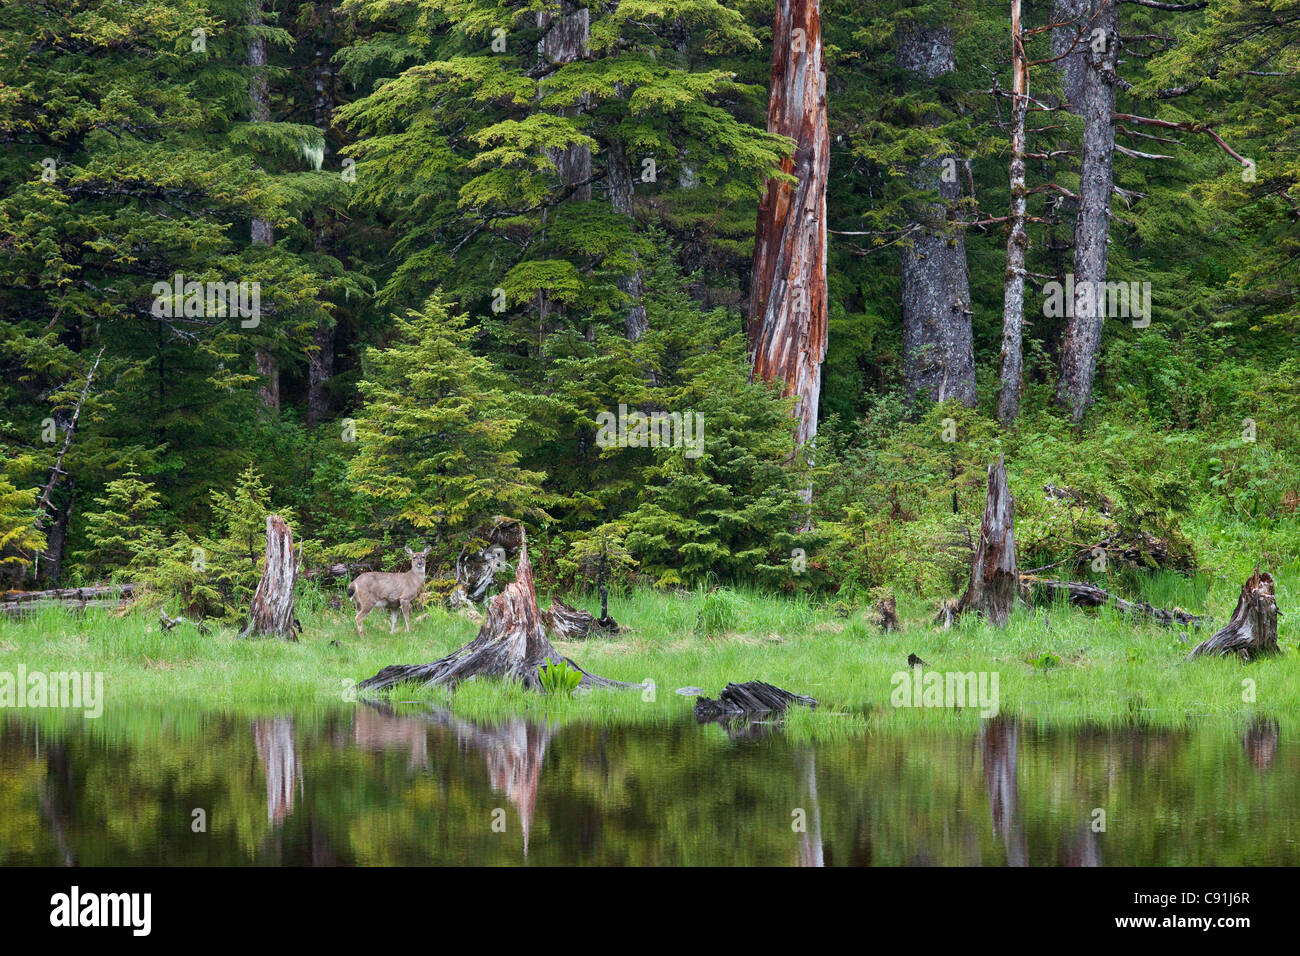 Sitka Black-tailed deer standing by pond in the rainforest, Hinchinbrook Island, Prince William Sound, Southcentral Alaska Stock Photo